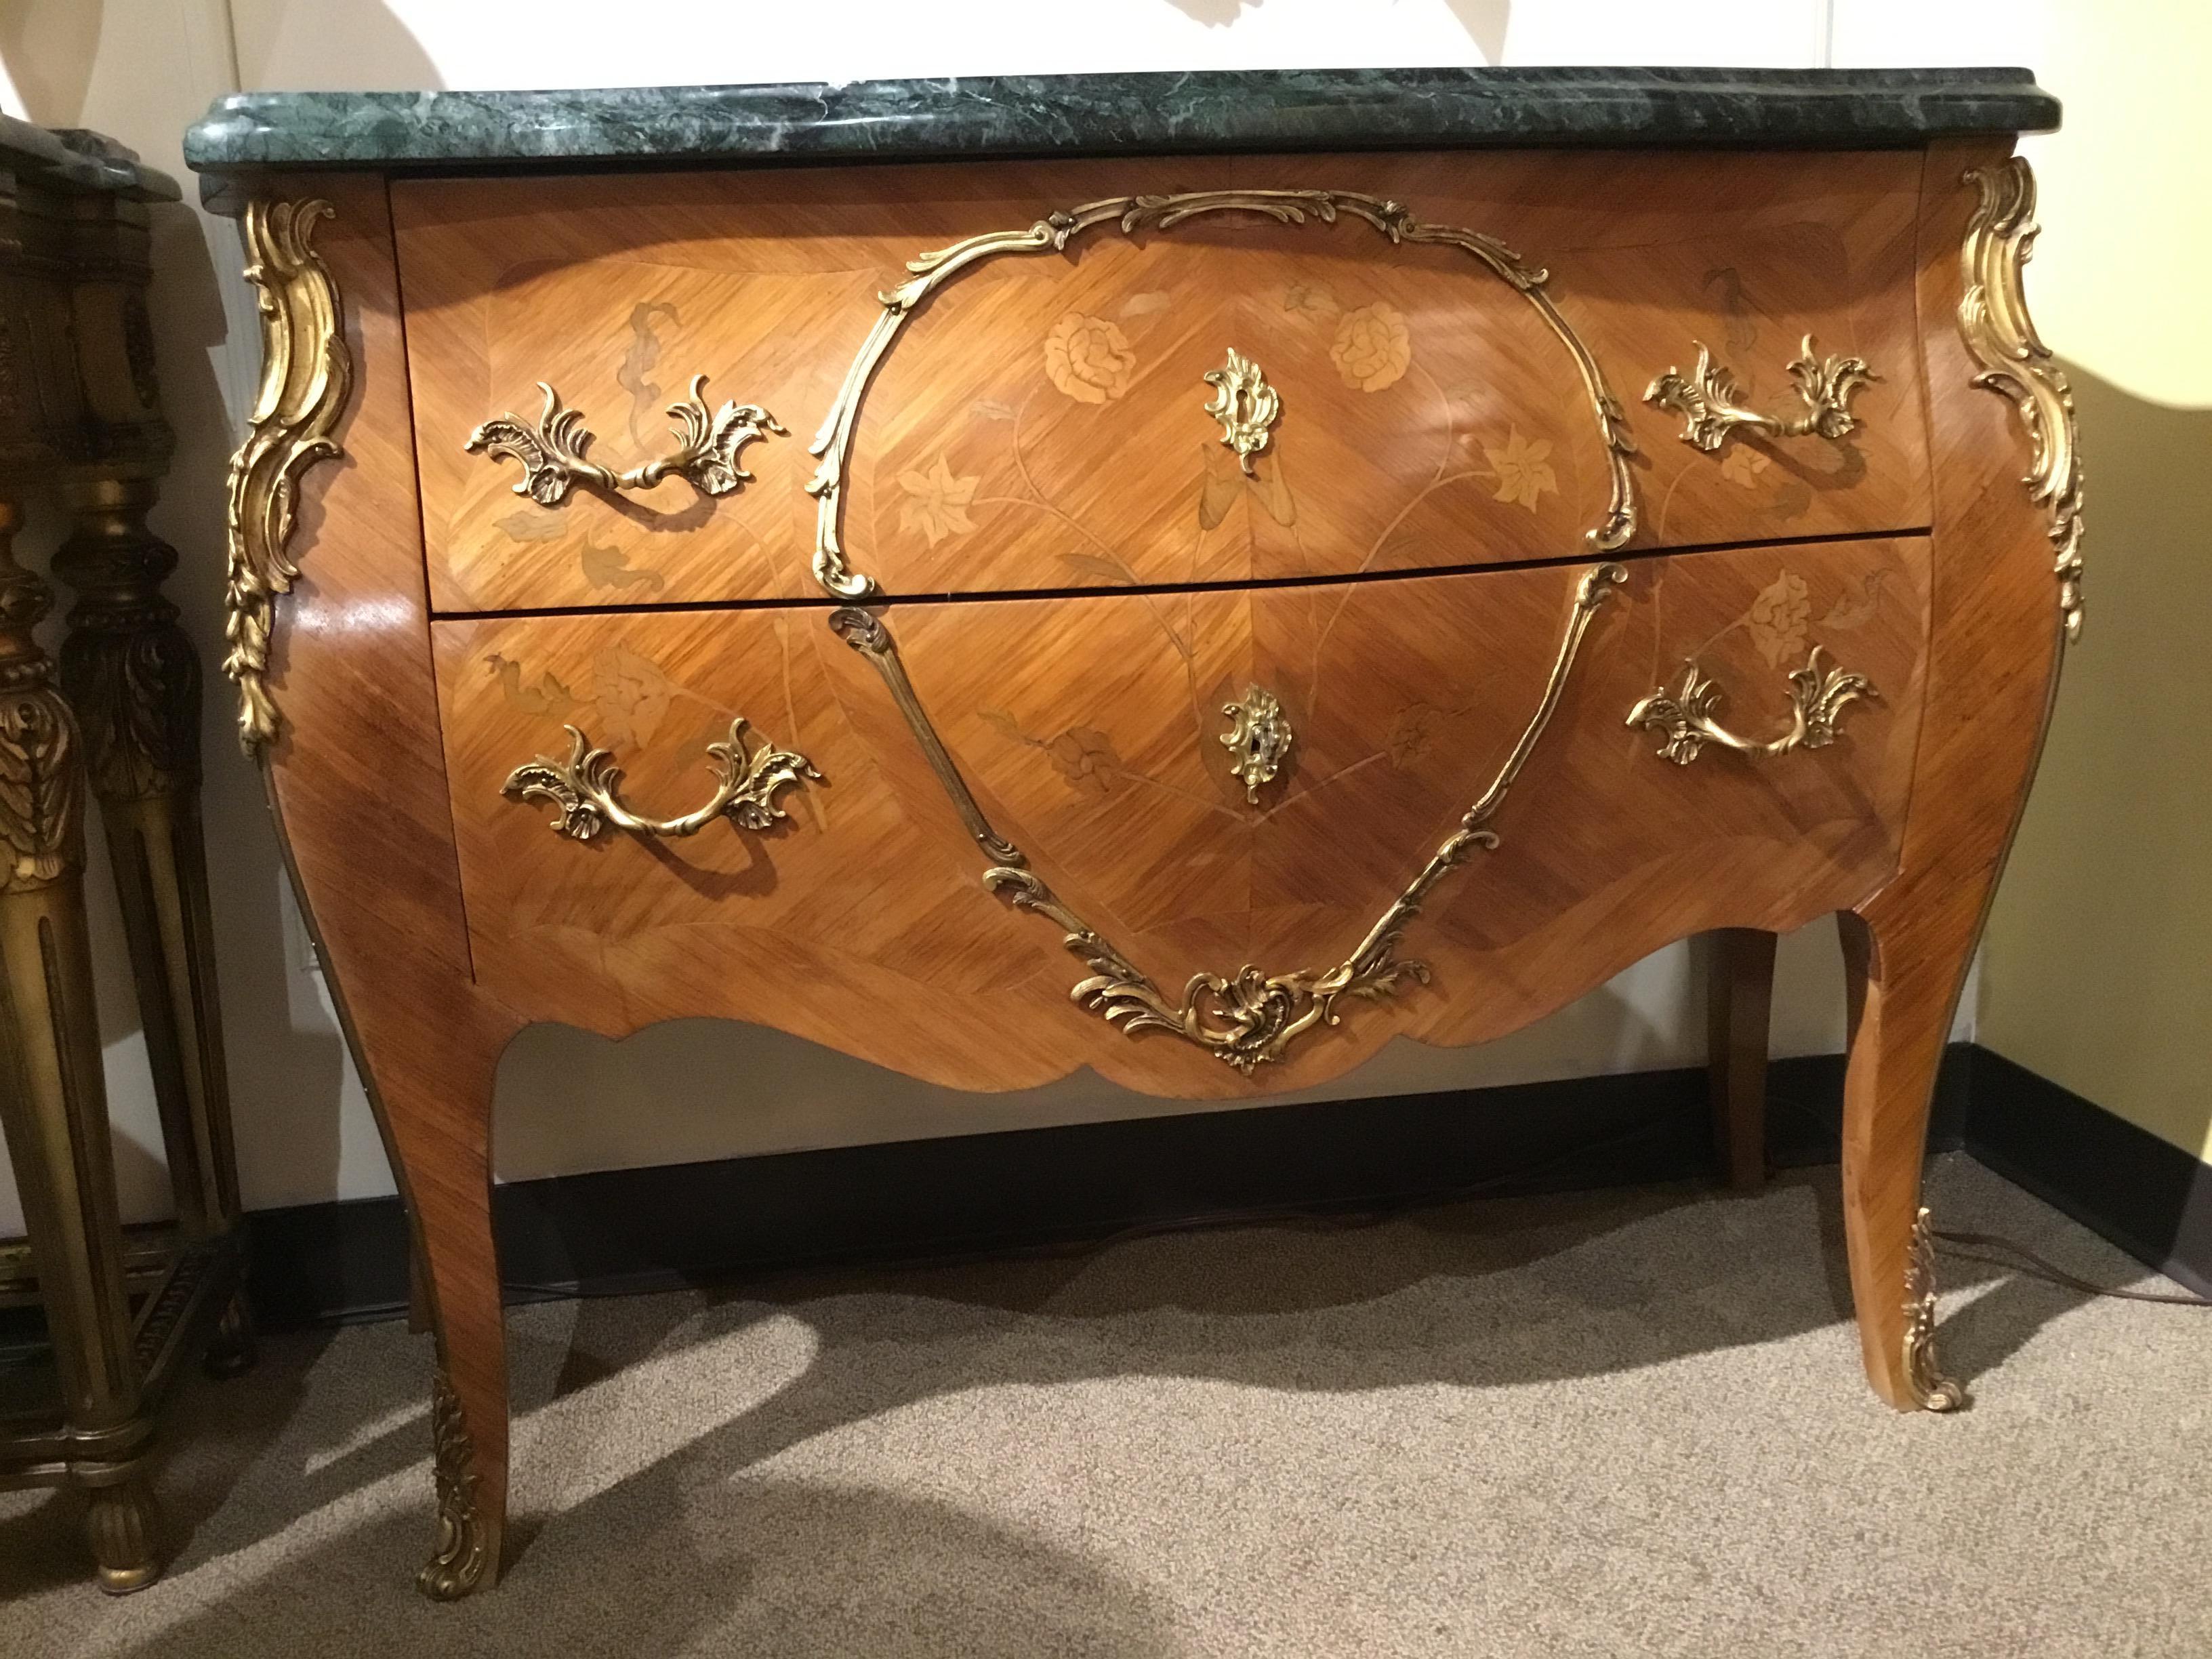 Serpentine fronted marble top and bombe form, fitted with two drawers mounted with gilt bronze
Trim, pulls and escutcheons. Accented with floral inspired marquetry inlays. The contoured
Corners with foliate bronze appointments ending in cast